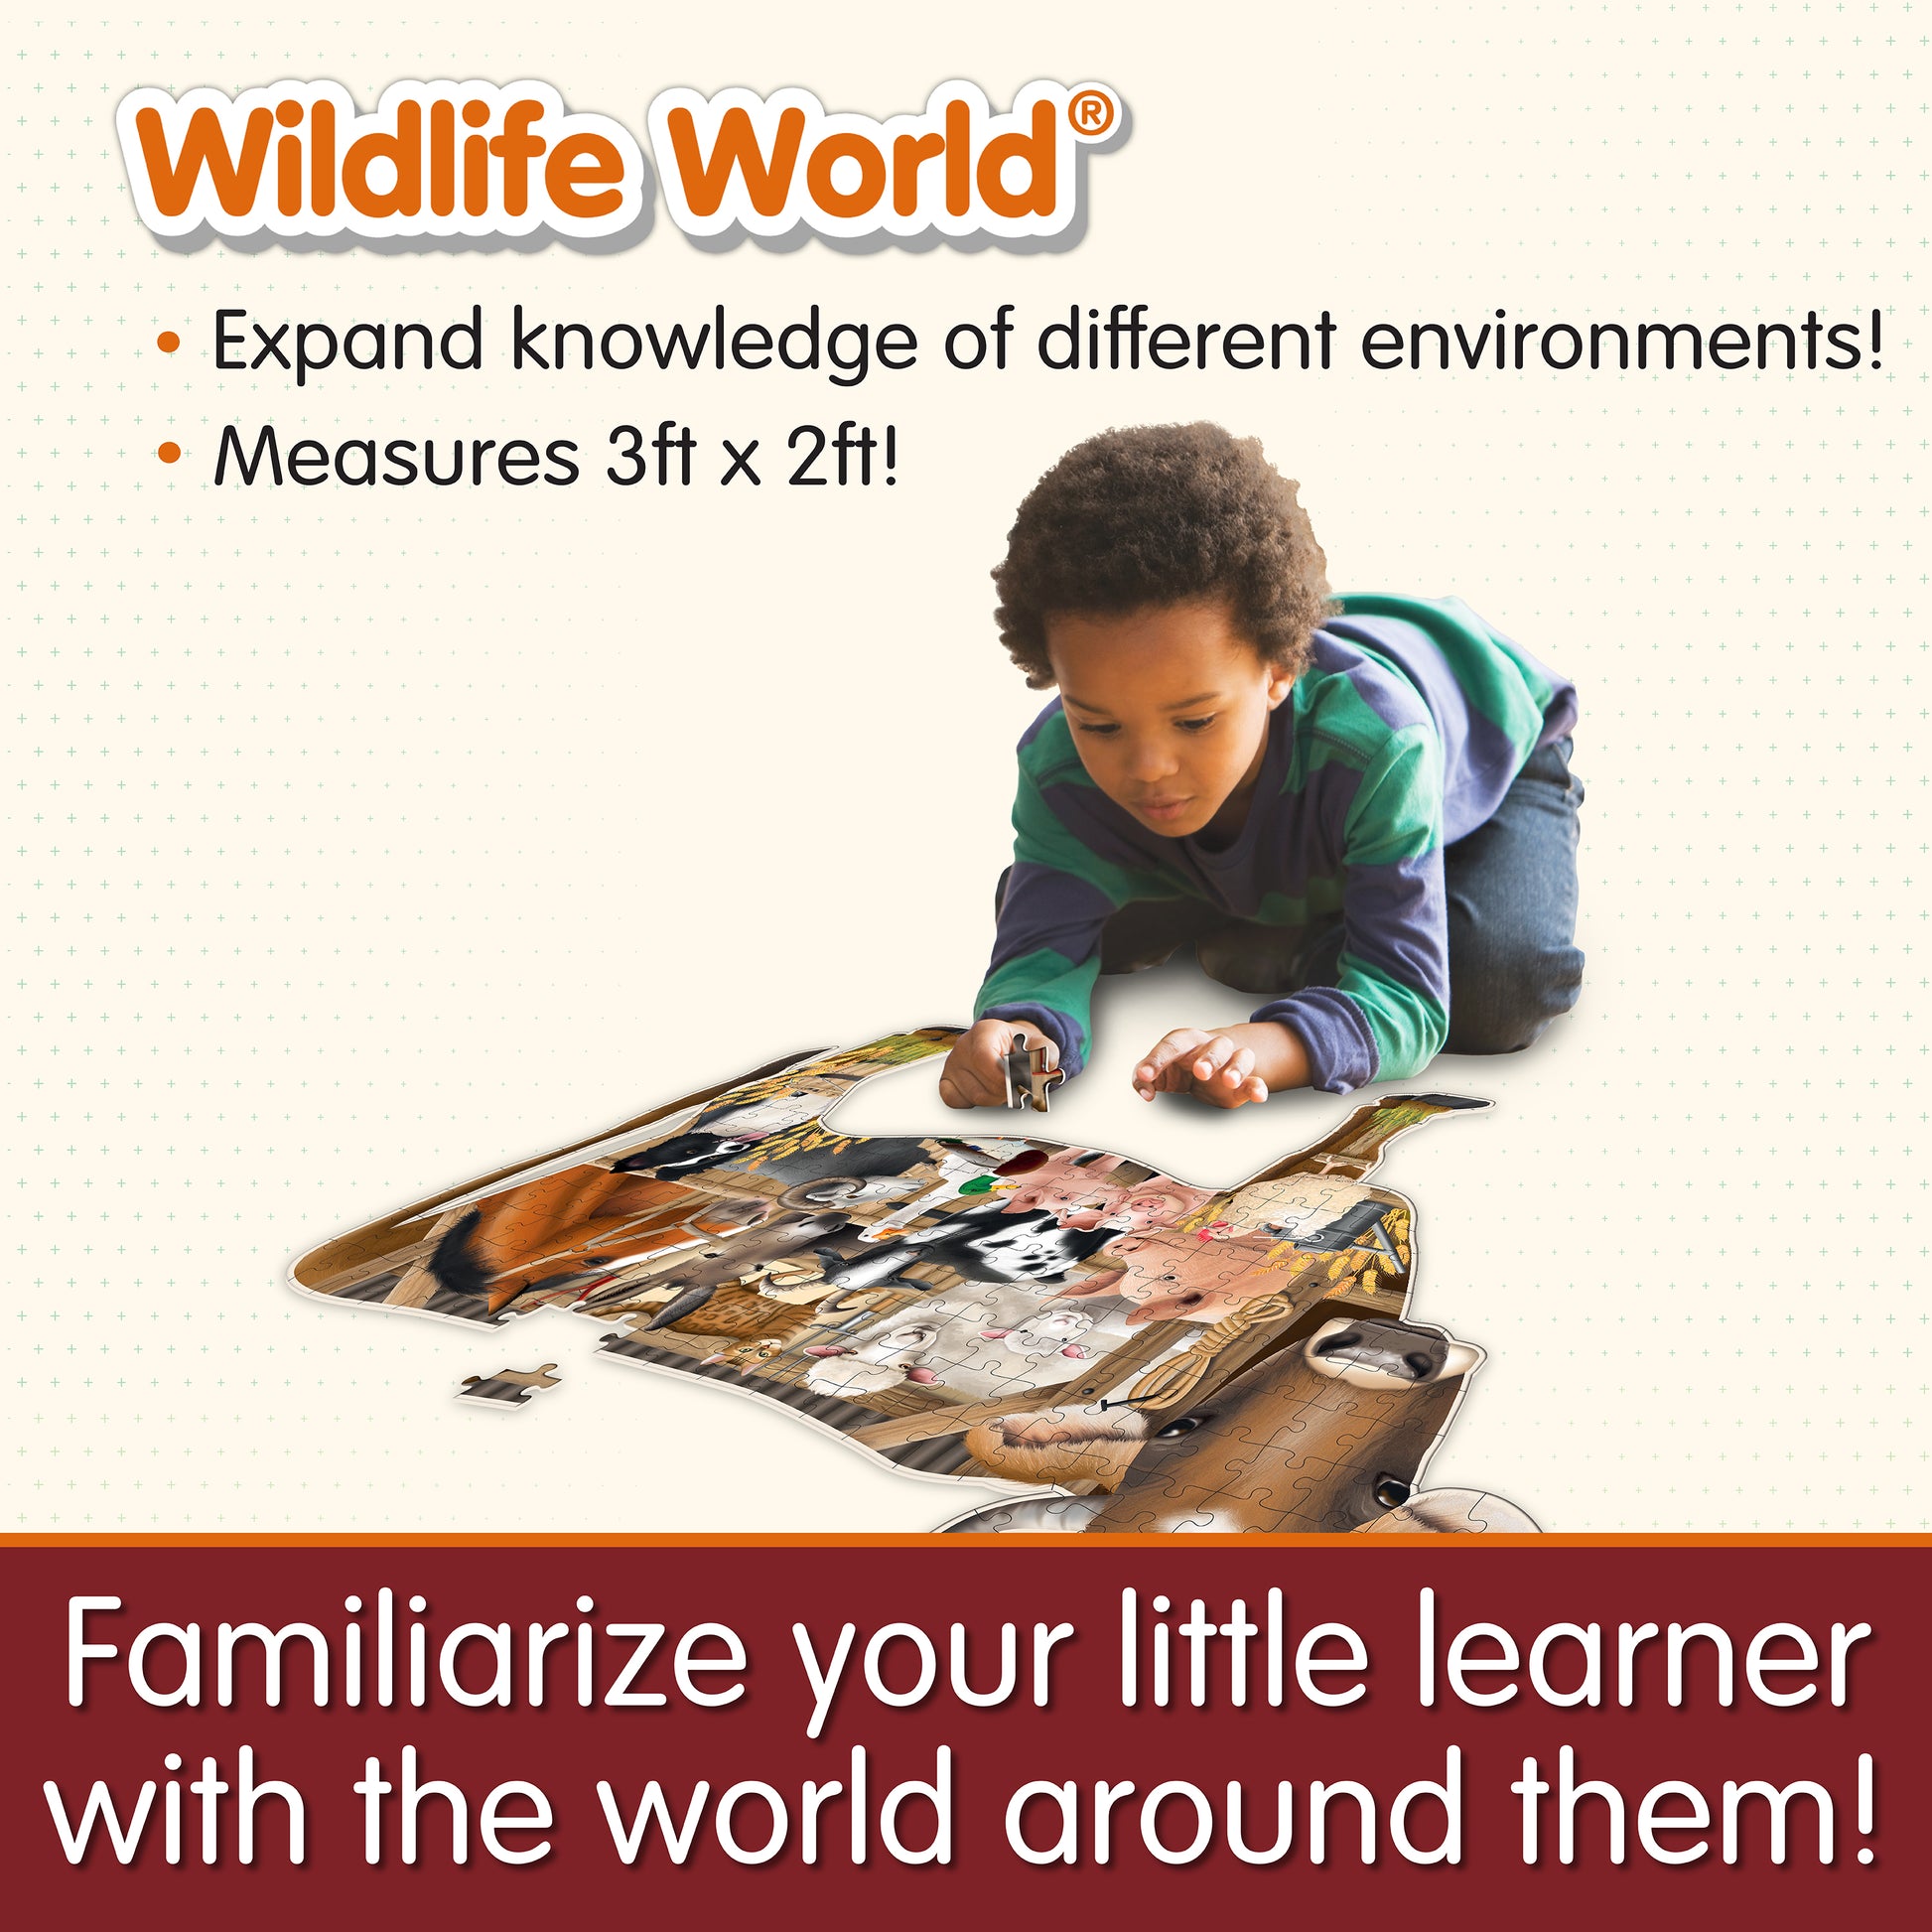 Infographic about Wildlife World Farm Puzzle that says, "Familiarize your little learner with the world around them!"